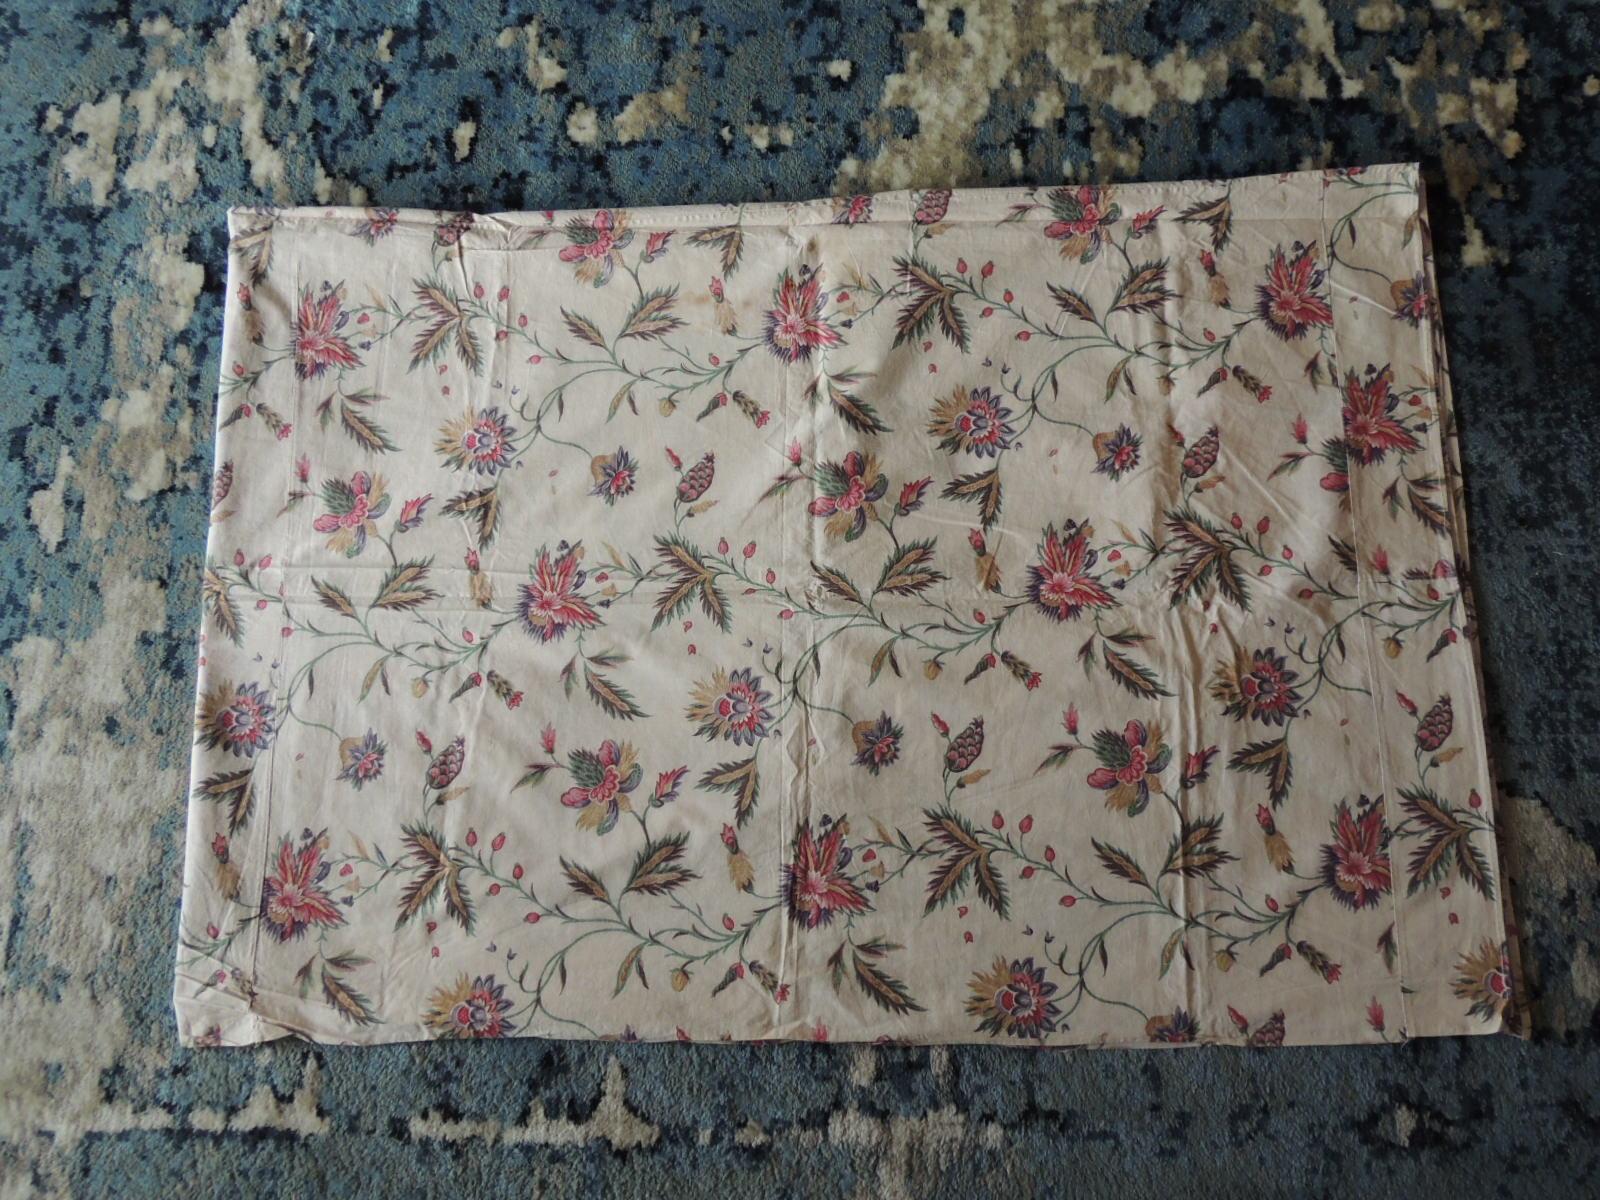 Vintage floral printed textile panel
Overall cotton print in shades of red, yellow and green.
Ideal for pillows, upholstery, window shades or slipcovers.
Three panels stitched together patchwork style
Size: 60